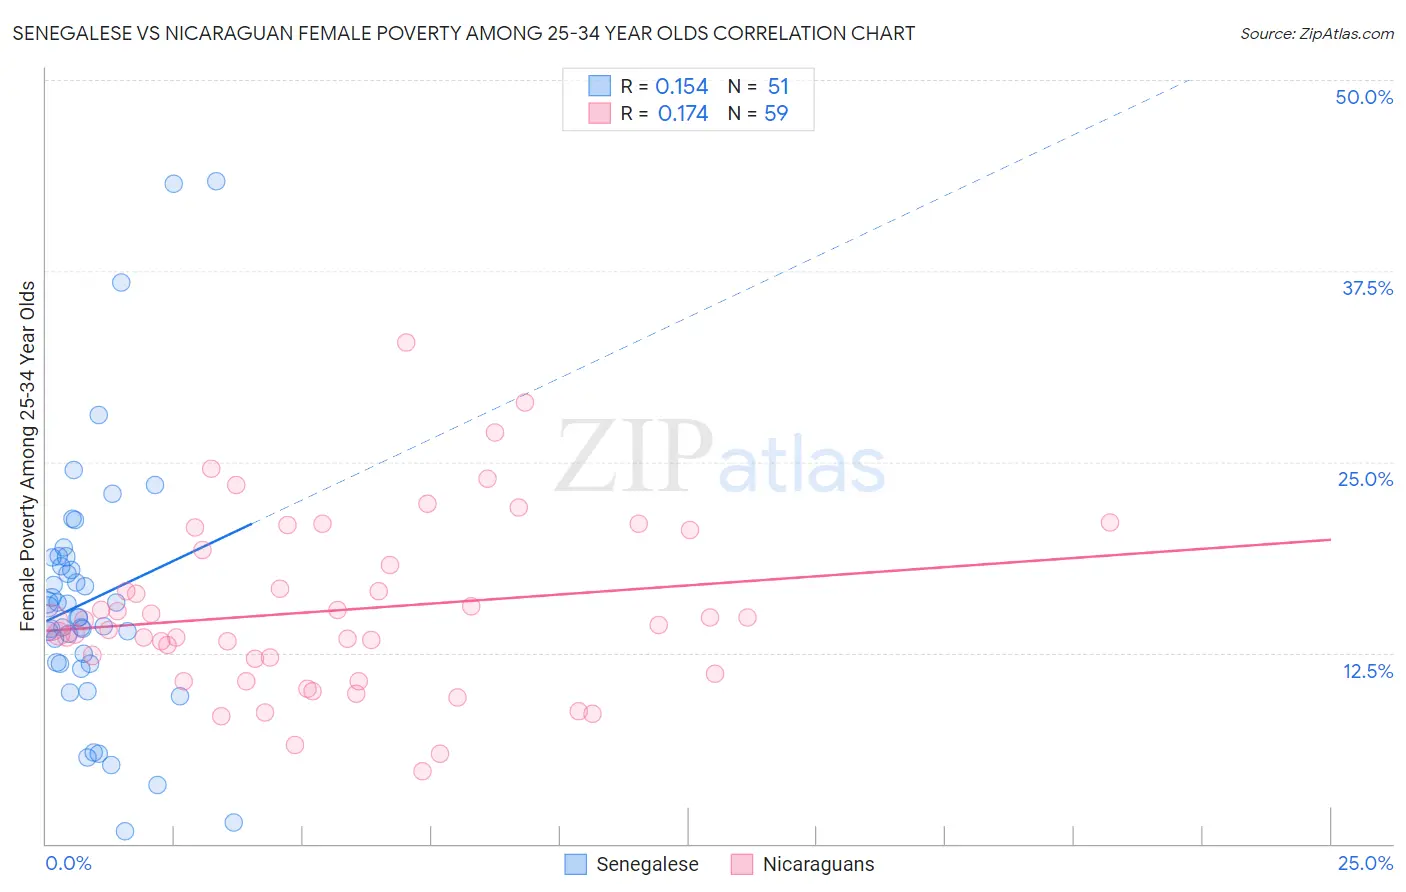 Senegalese vs Nicaraguan Female Poverty Among 25-34 Year Olds